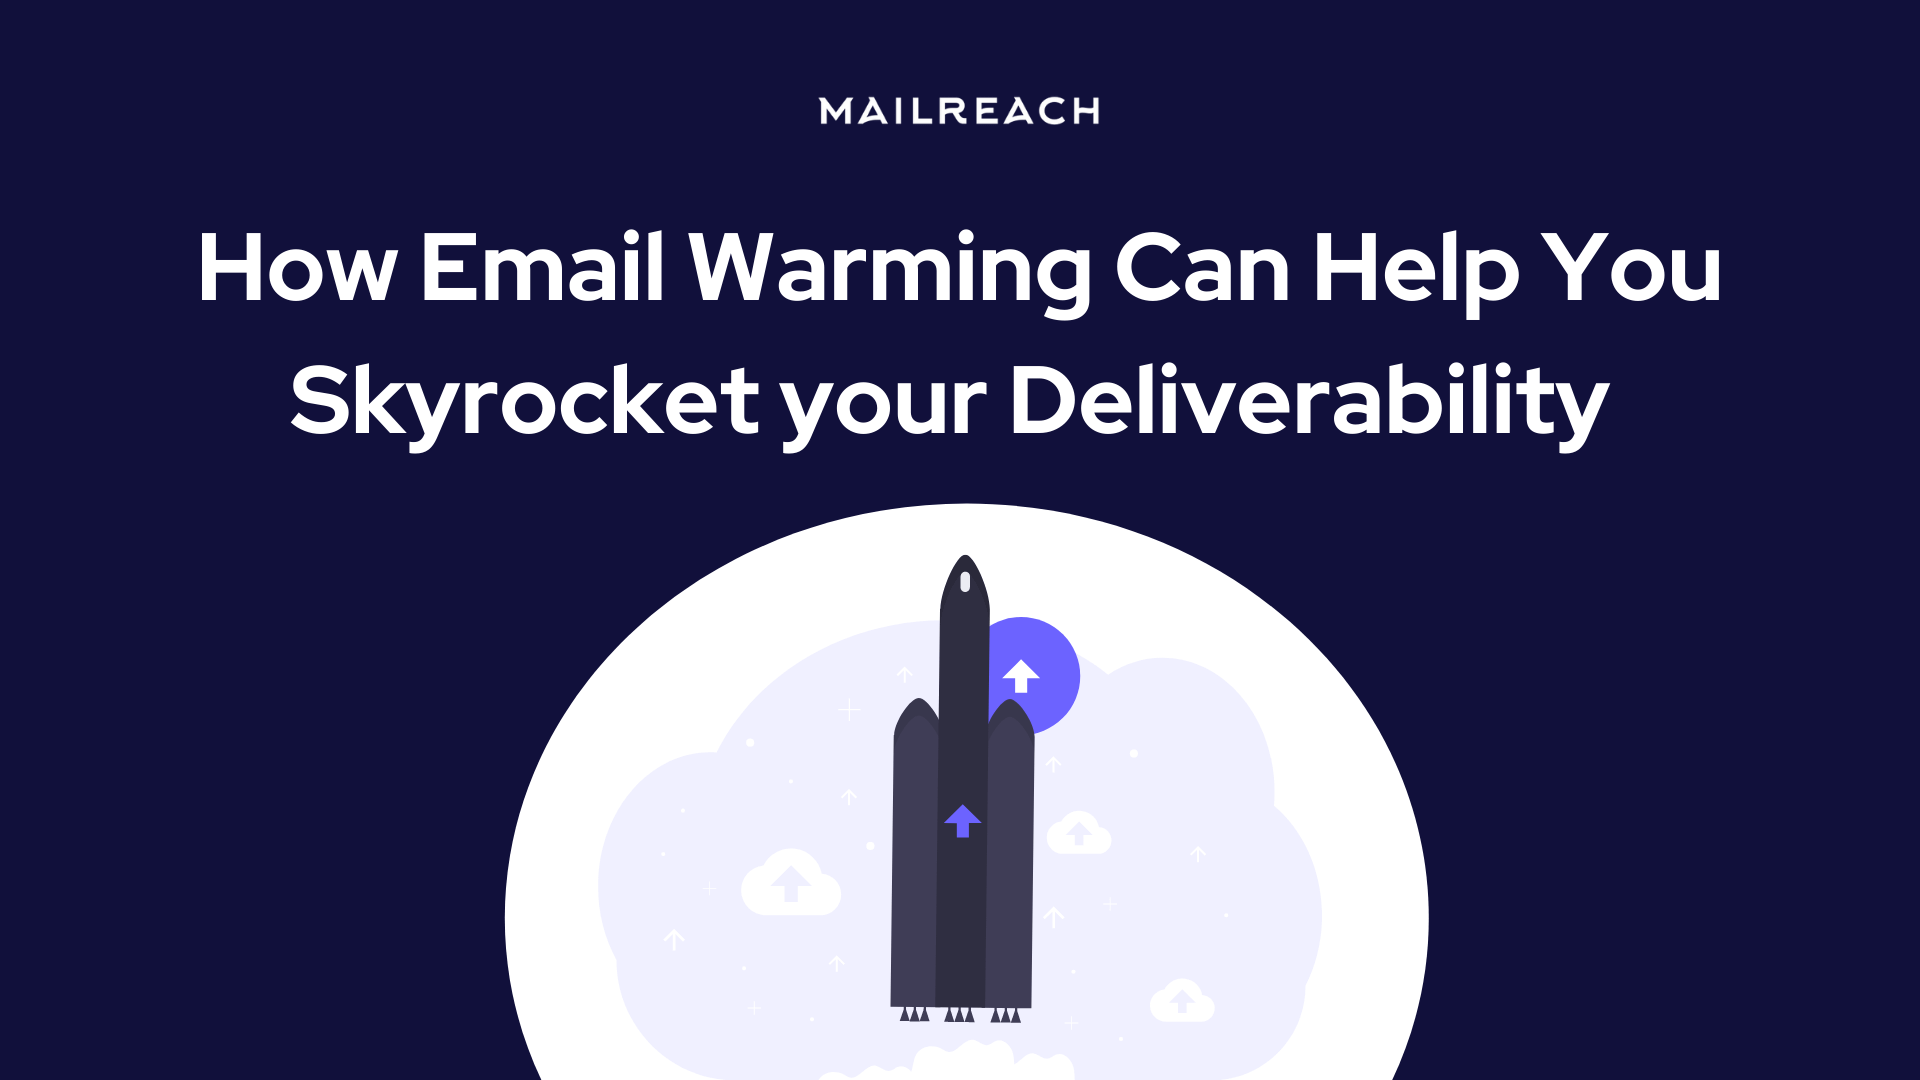 An Email Warming Service Can Help You Skyrocket your Deliverability